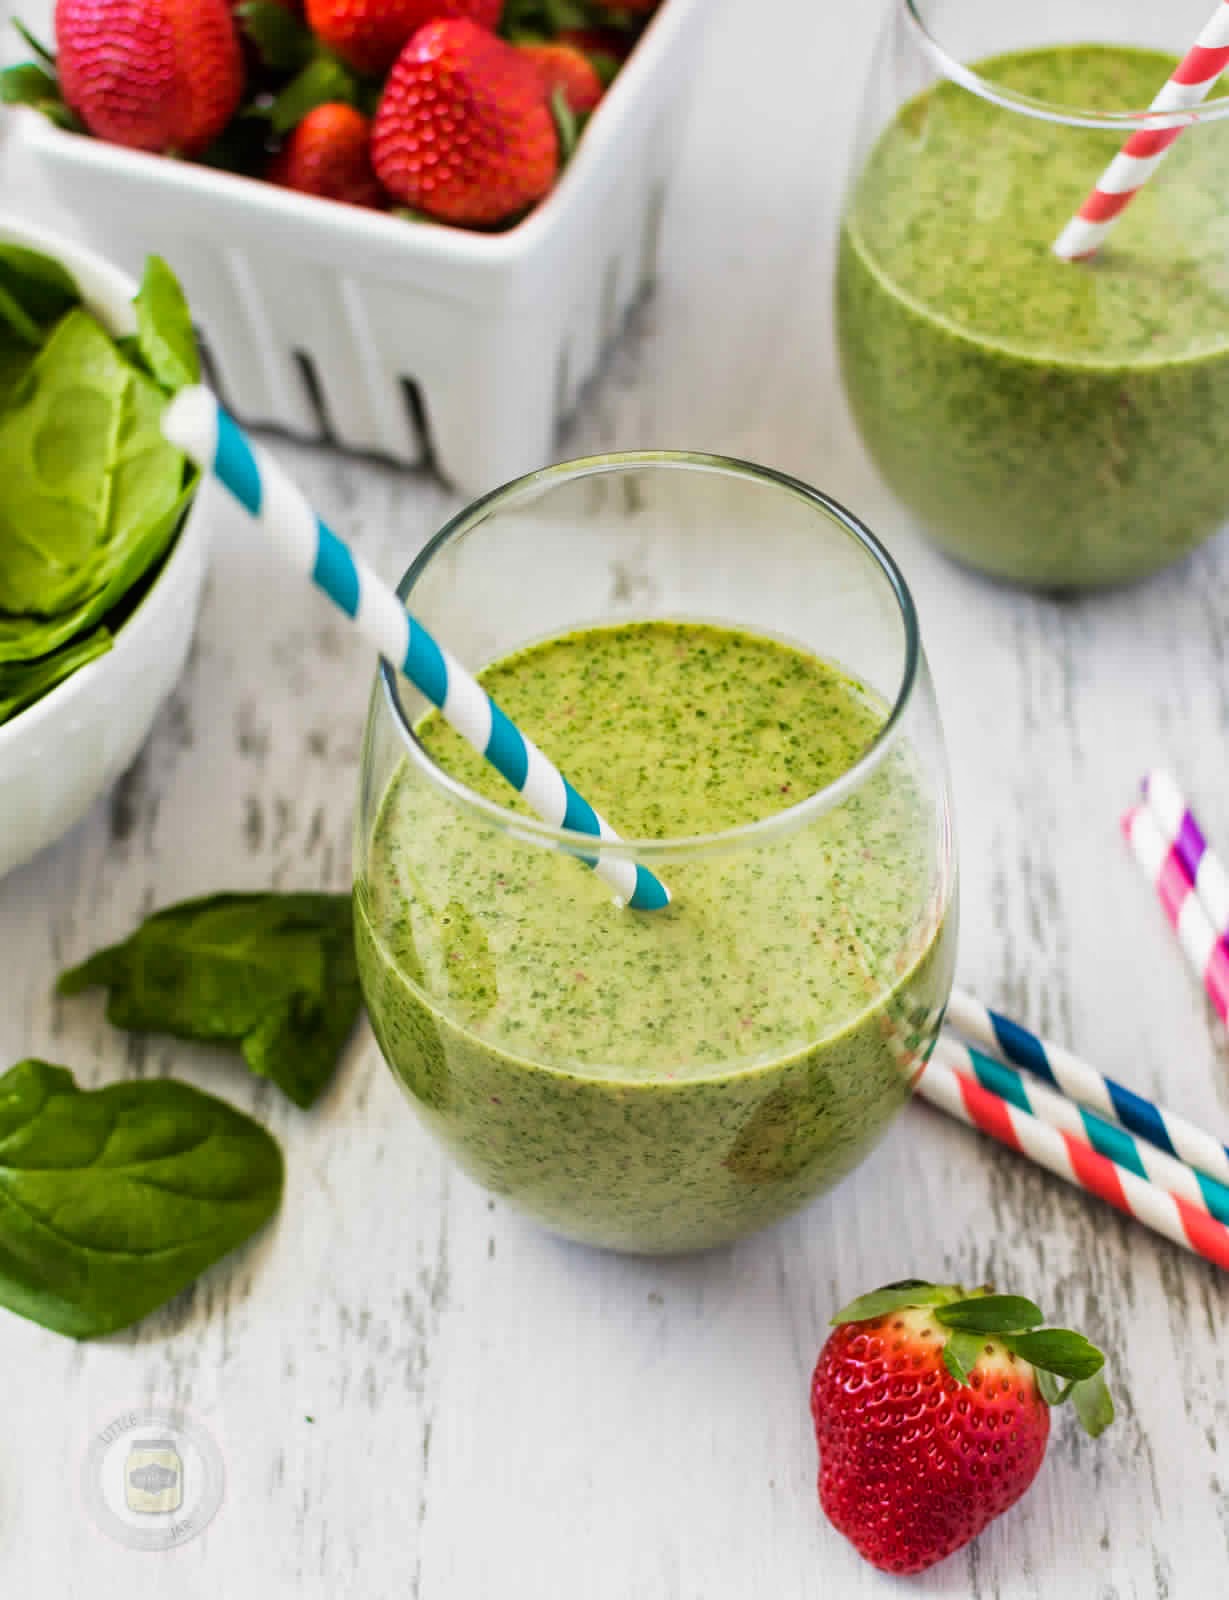 7 Easy Smoothie Recipes for Weight Loss and Energy